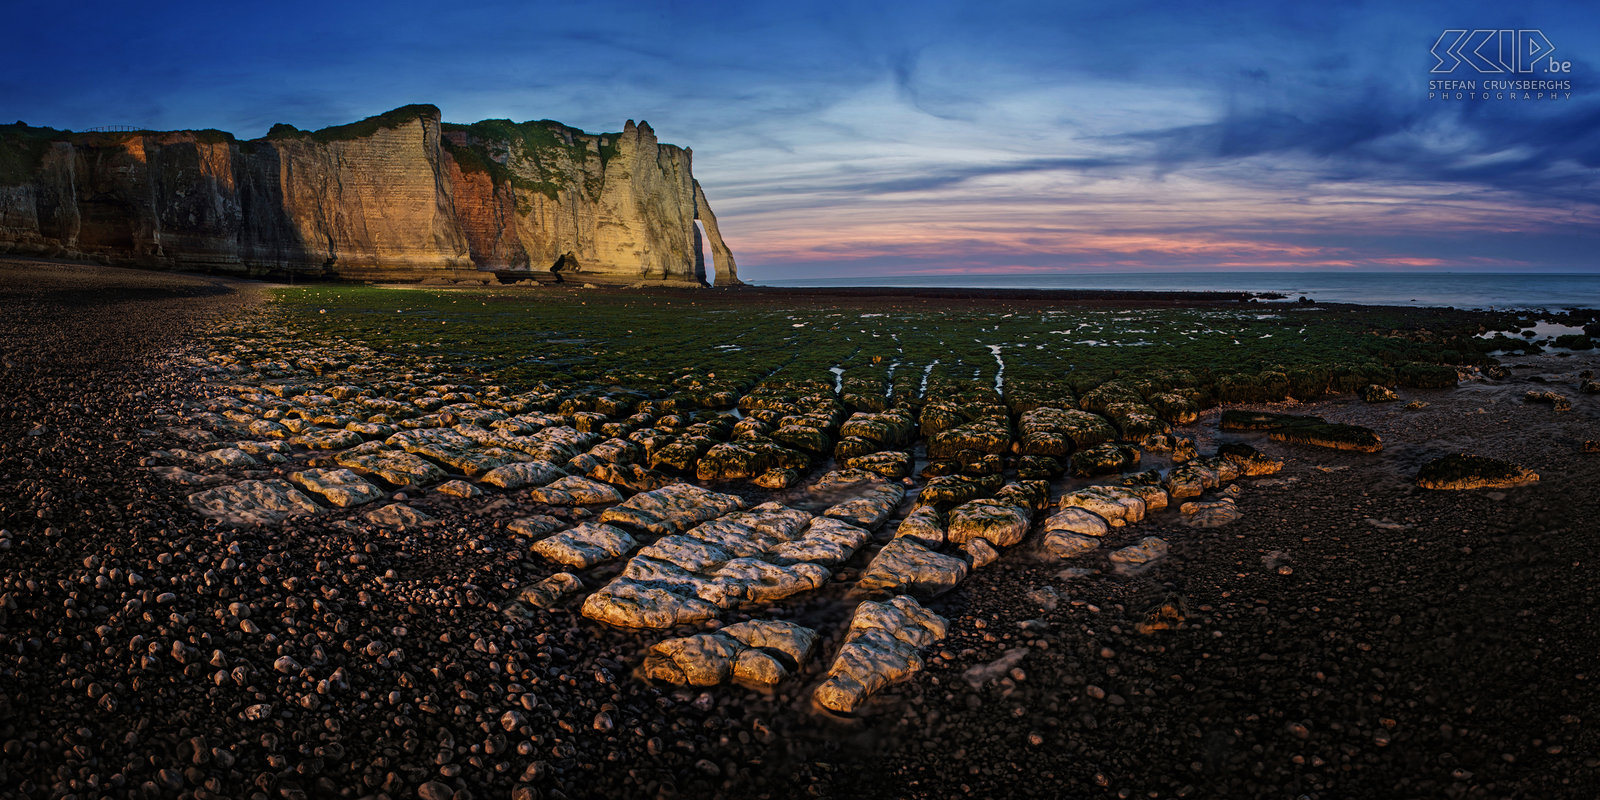 Normandy - Étretat by night We were photographing during the last light of the day and with low tide at the white cliffs of Étretat. Suddenly there was a lot of artificial light. It seems that the city has installed big spotlights to lighten up the cliffs with orange and white light during the night. This is a stiched panorama photo of the beach and cliffs. Stefan Cruysberghs